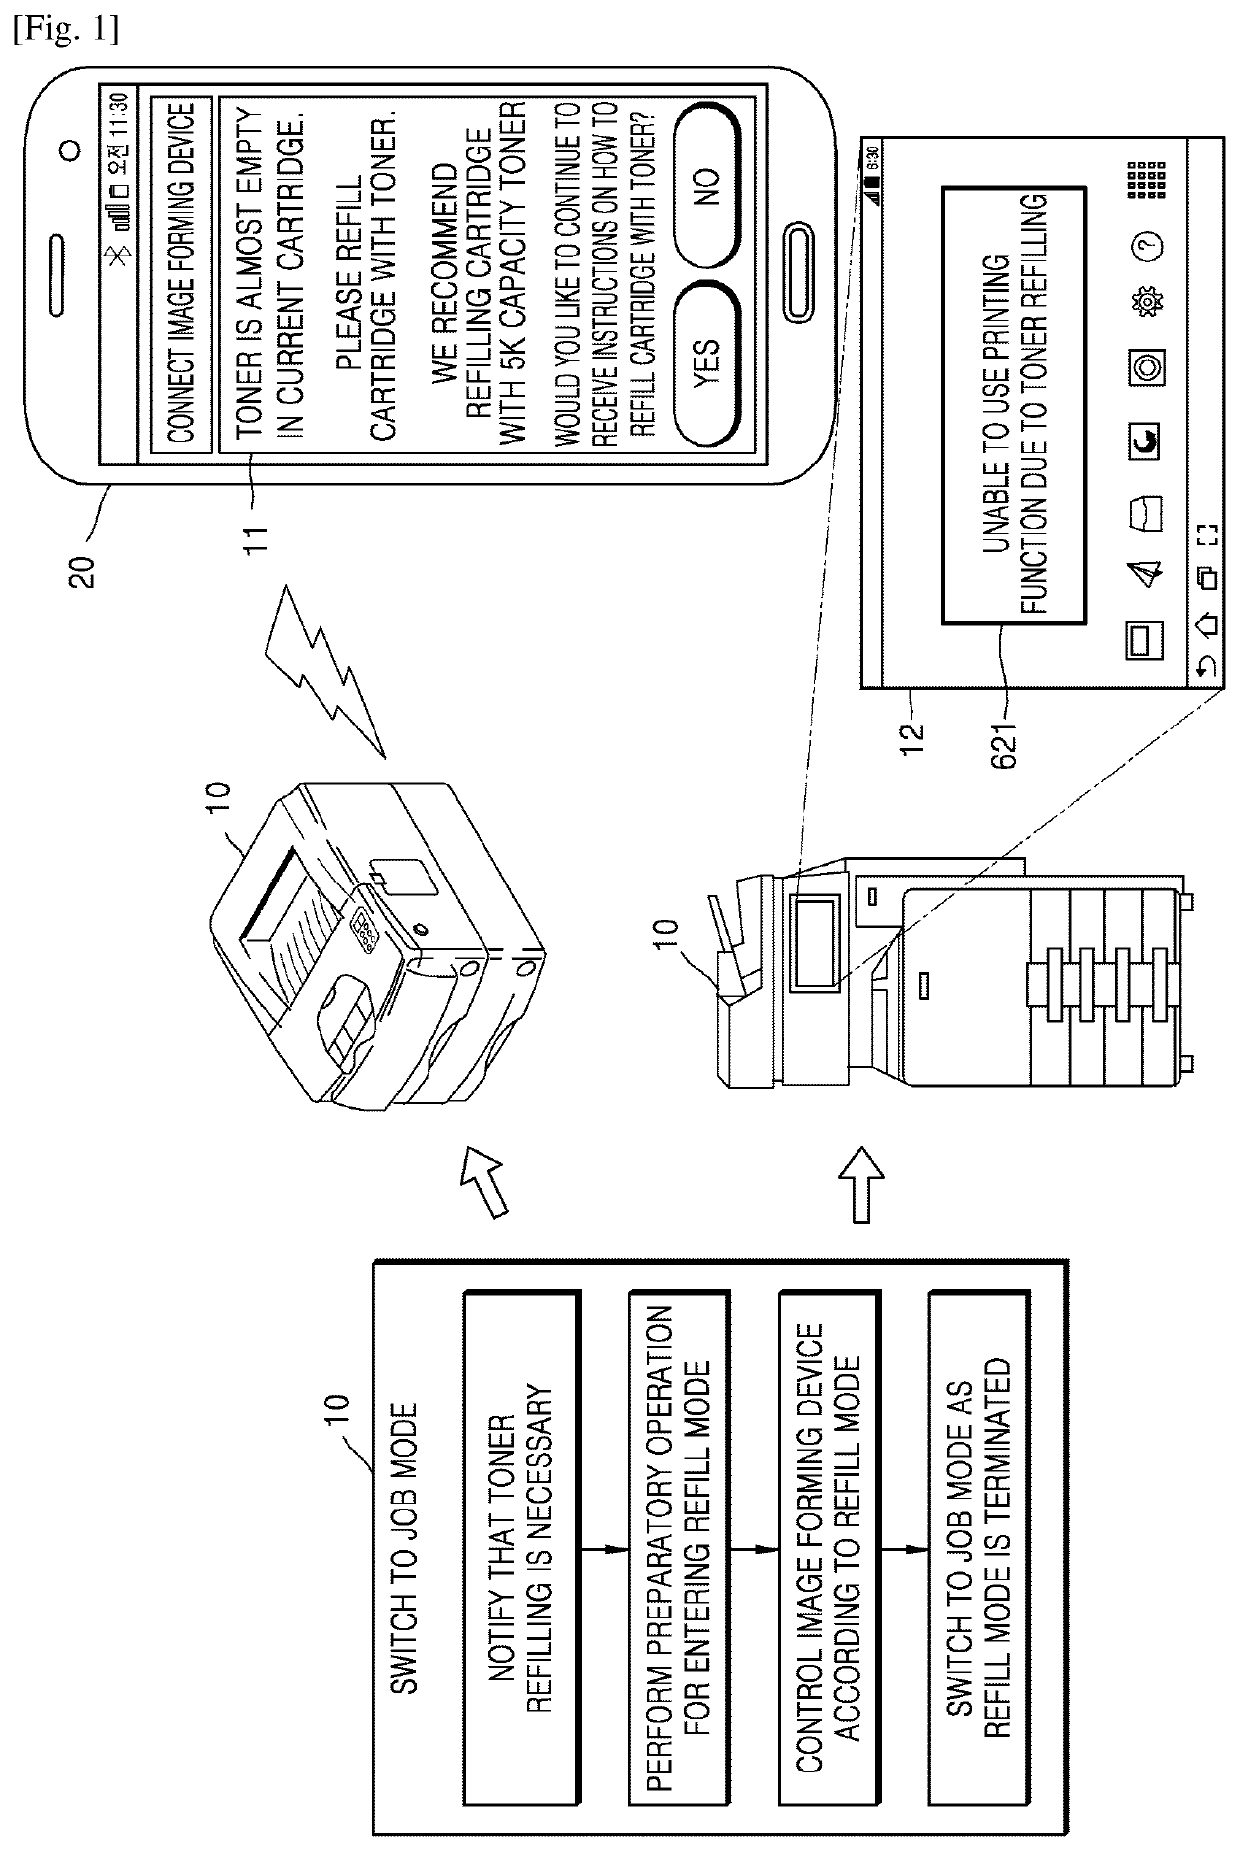 Controlling operation of image forming apparatus according to toner refill mode